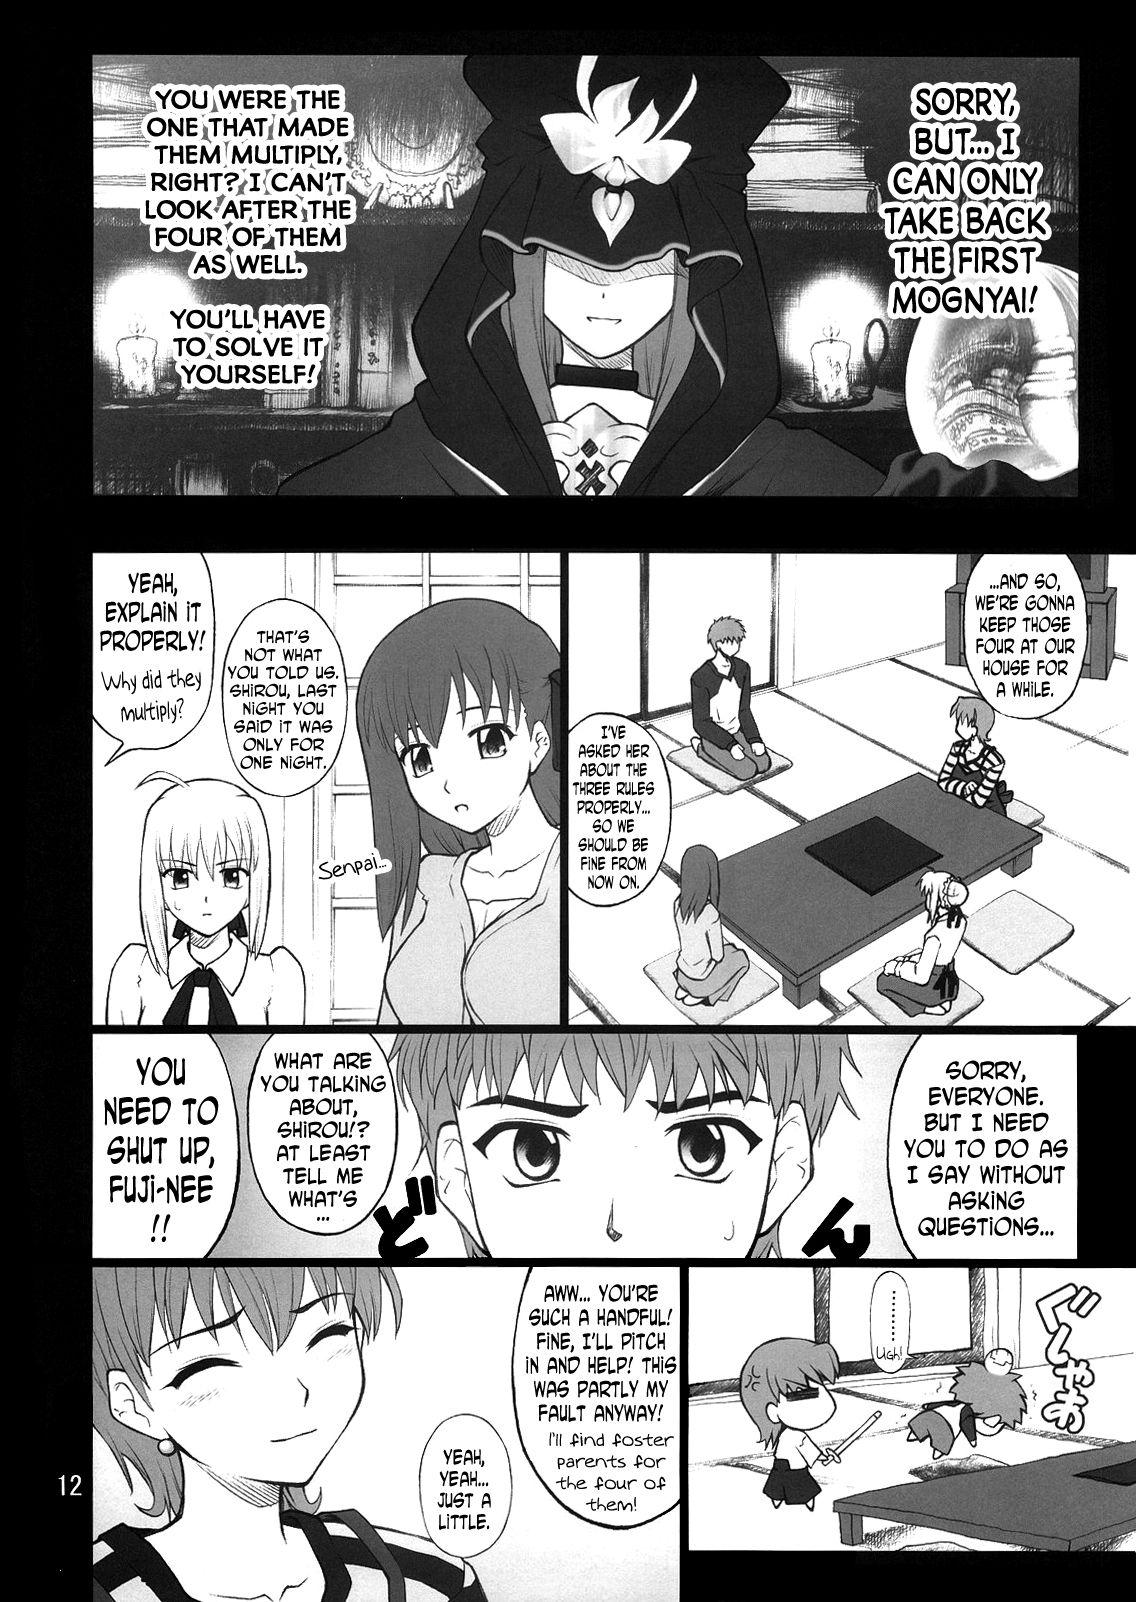 Facesitting Grem-Rin 2 - Fate stay night Pool - Page 11